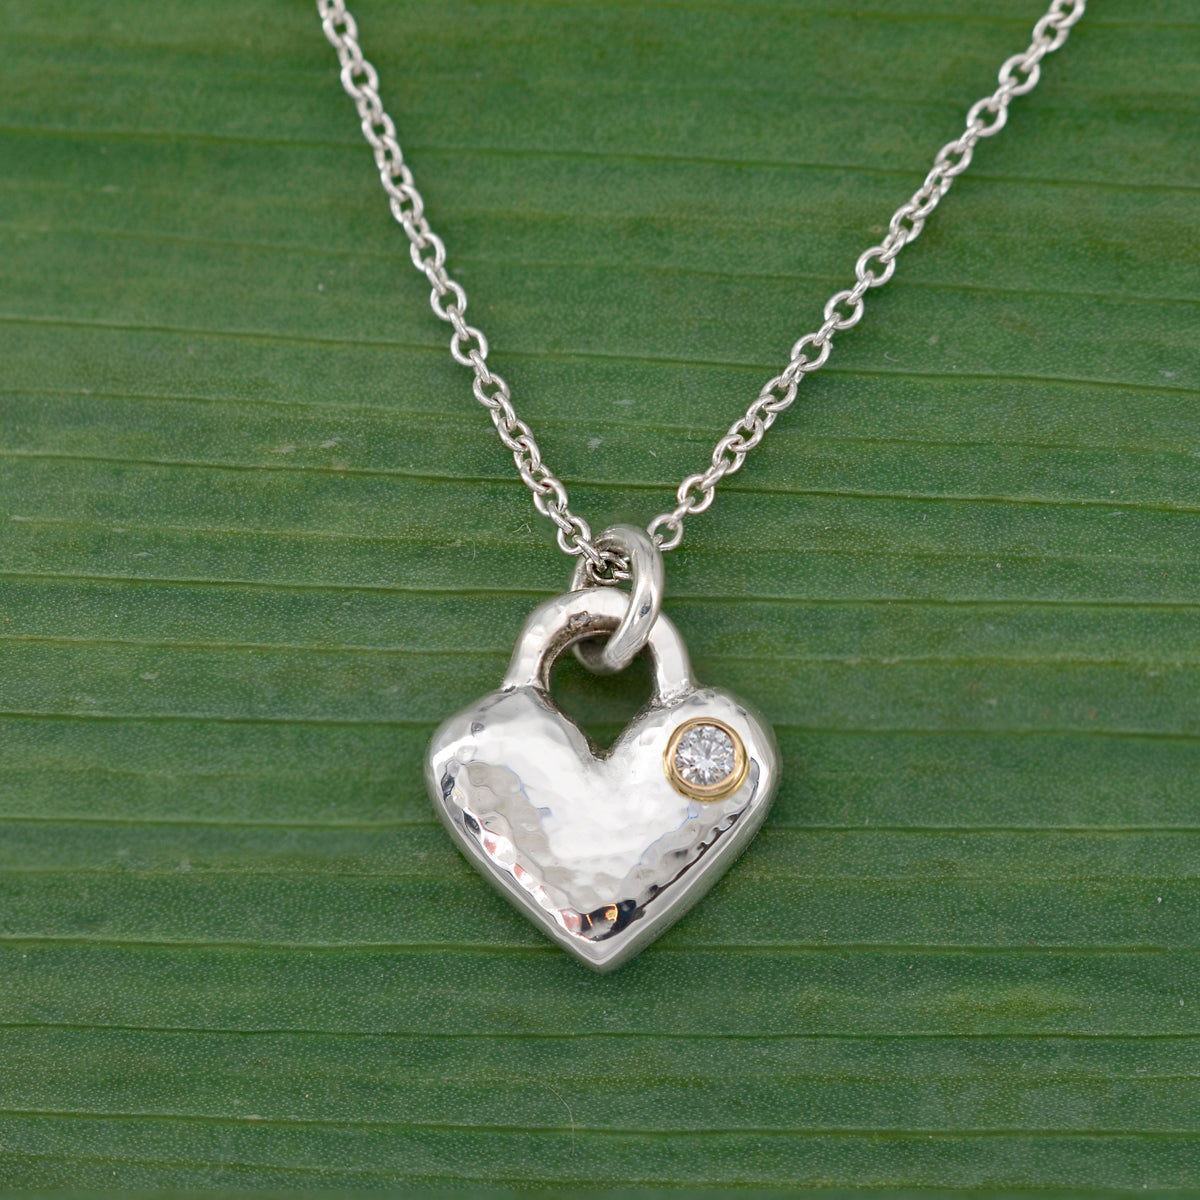 Forever Love Necklace w/ Diamond